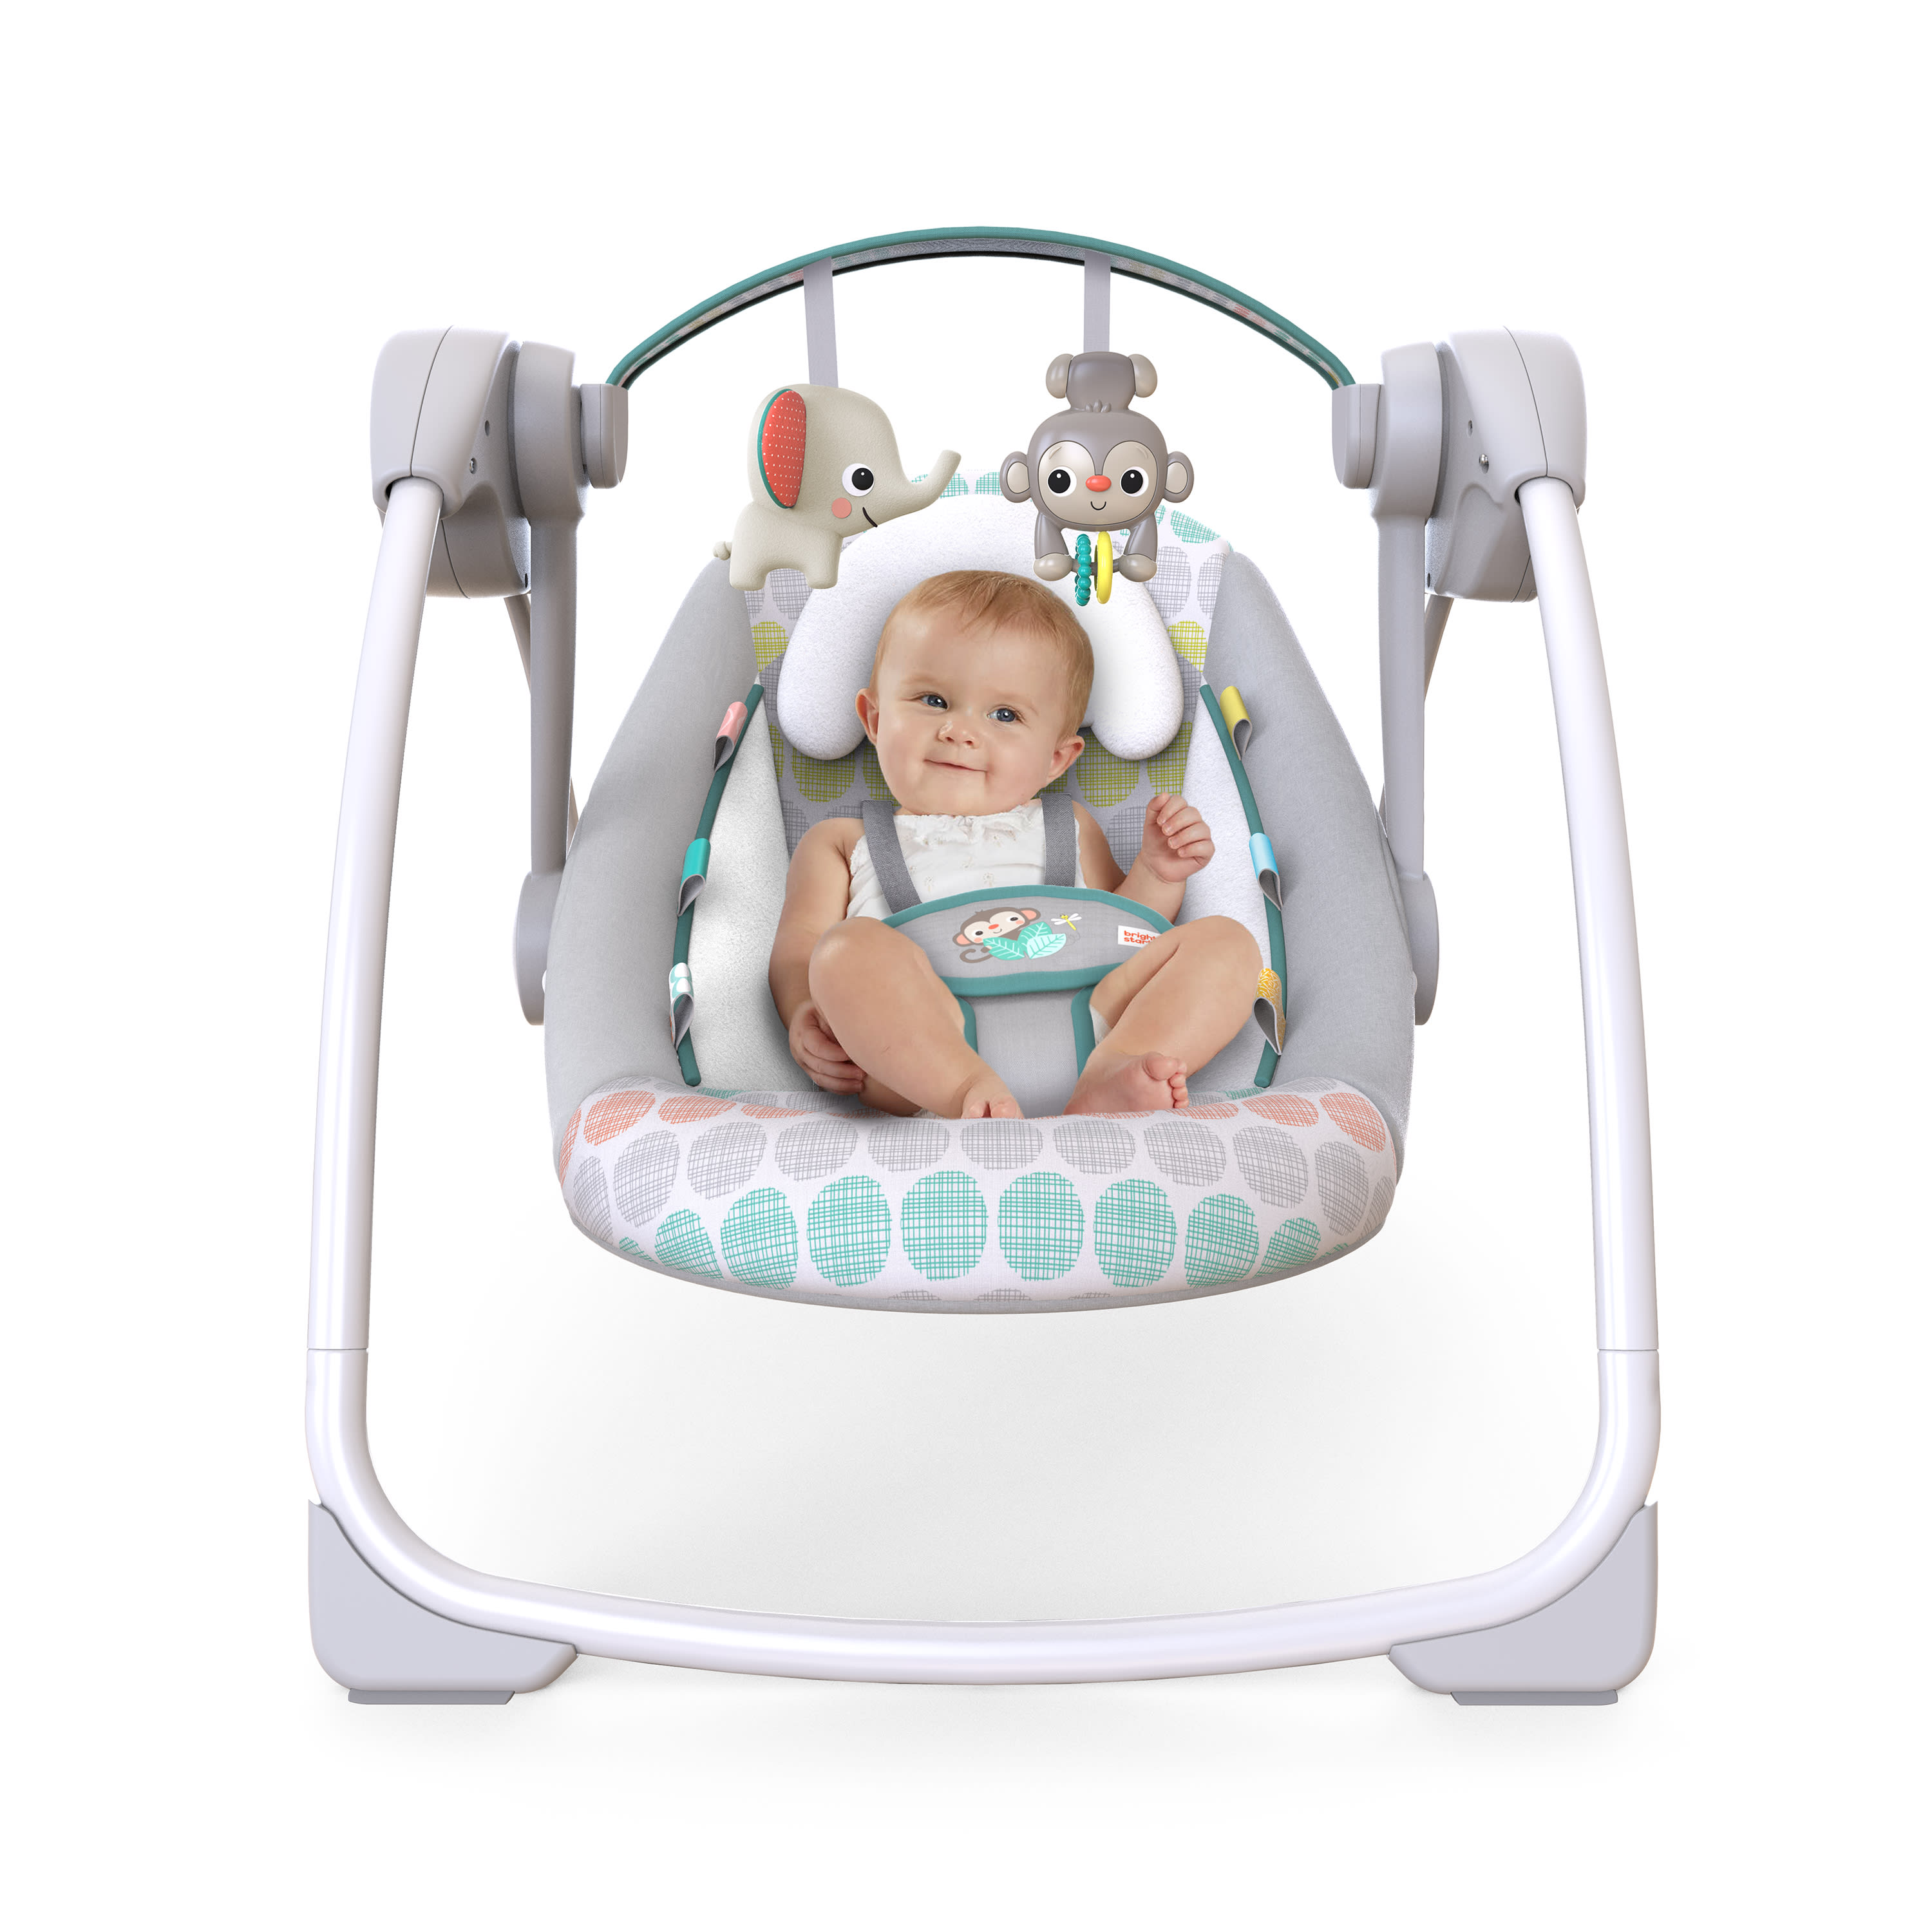 Bright Starts Whimsical Wild Portable Compact Baby Swing with Taggies, Unisex, Newborn and up - image 1 of 12